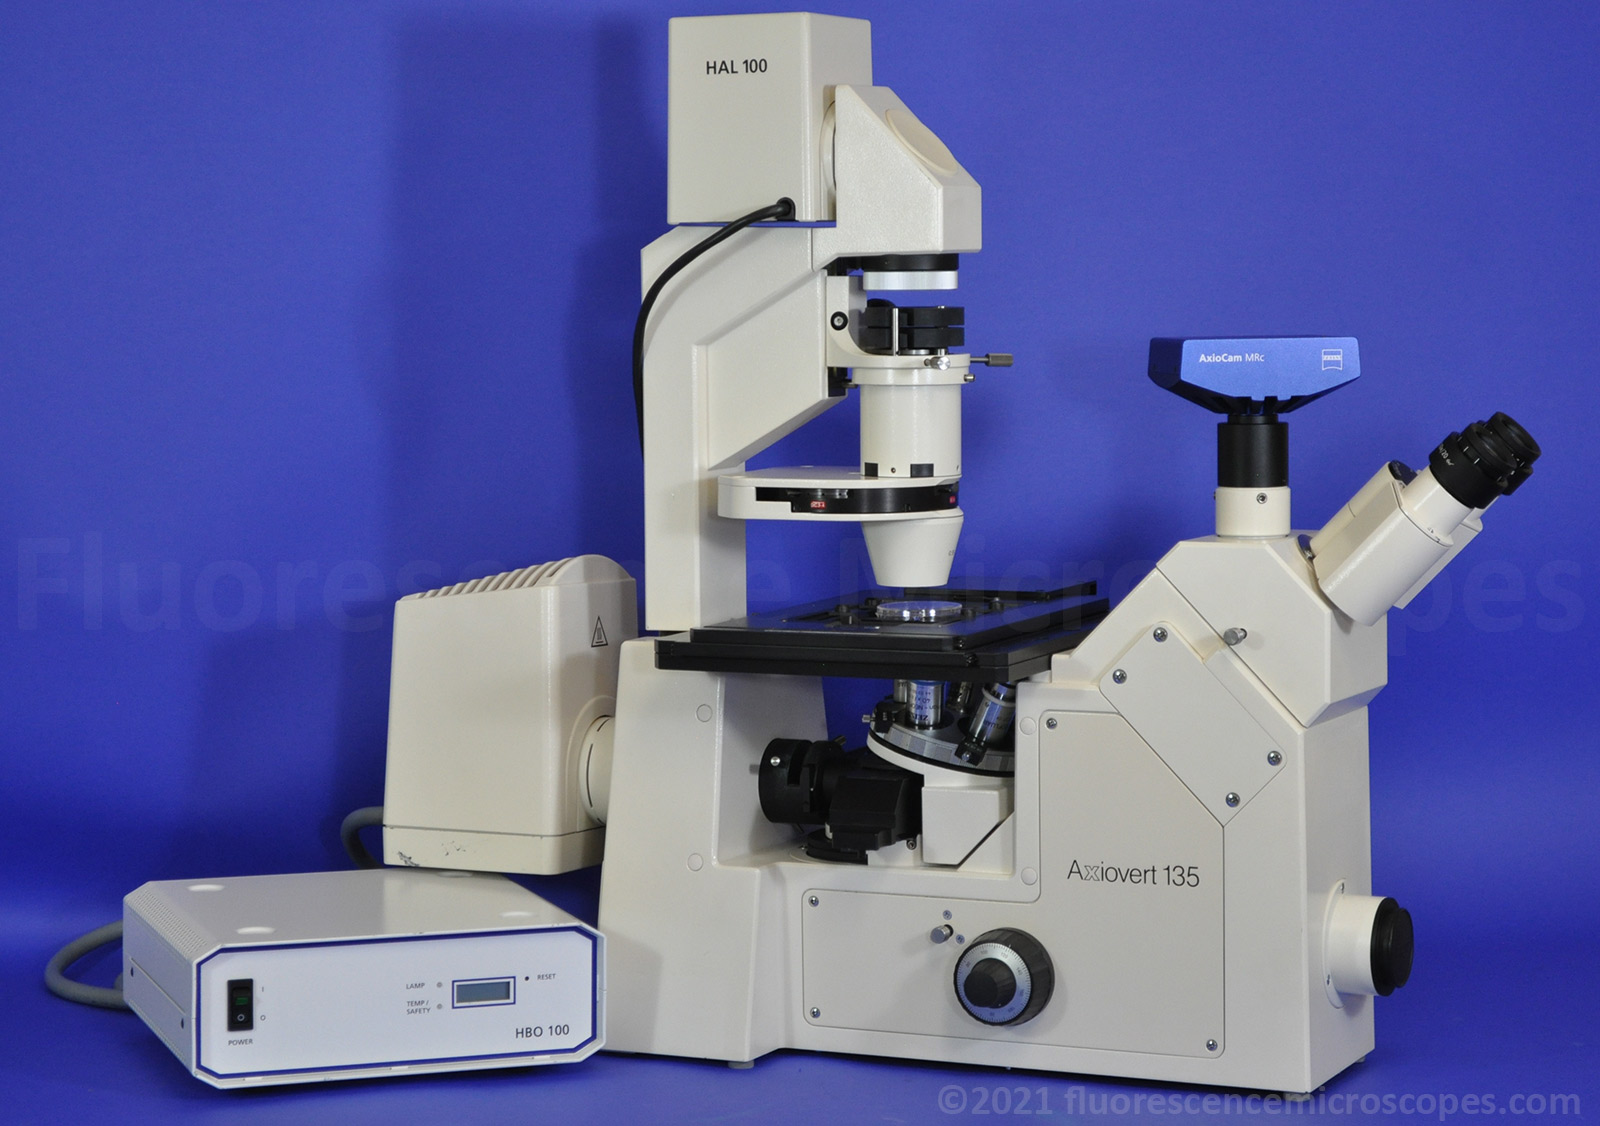 Zeiss Axiovert 135 Inverted (high power) DIC Fluorescence Microscope